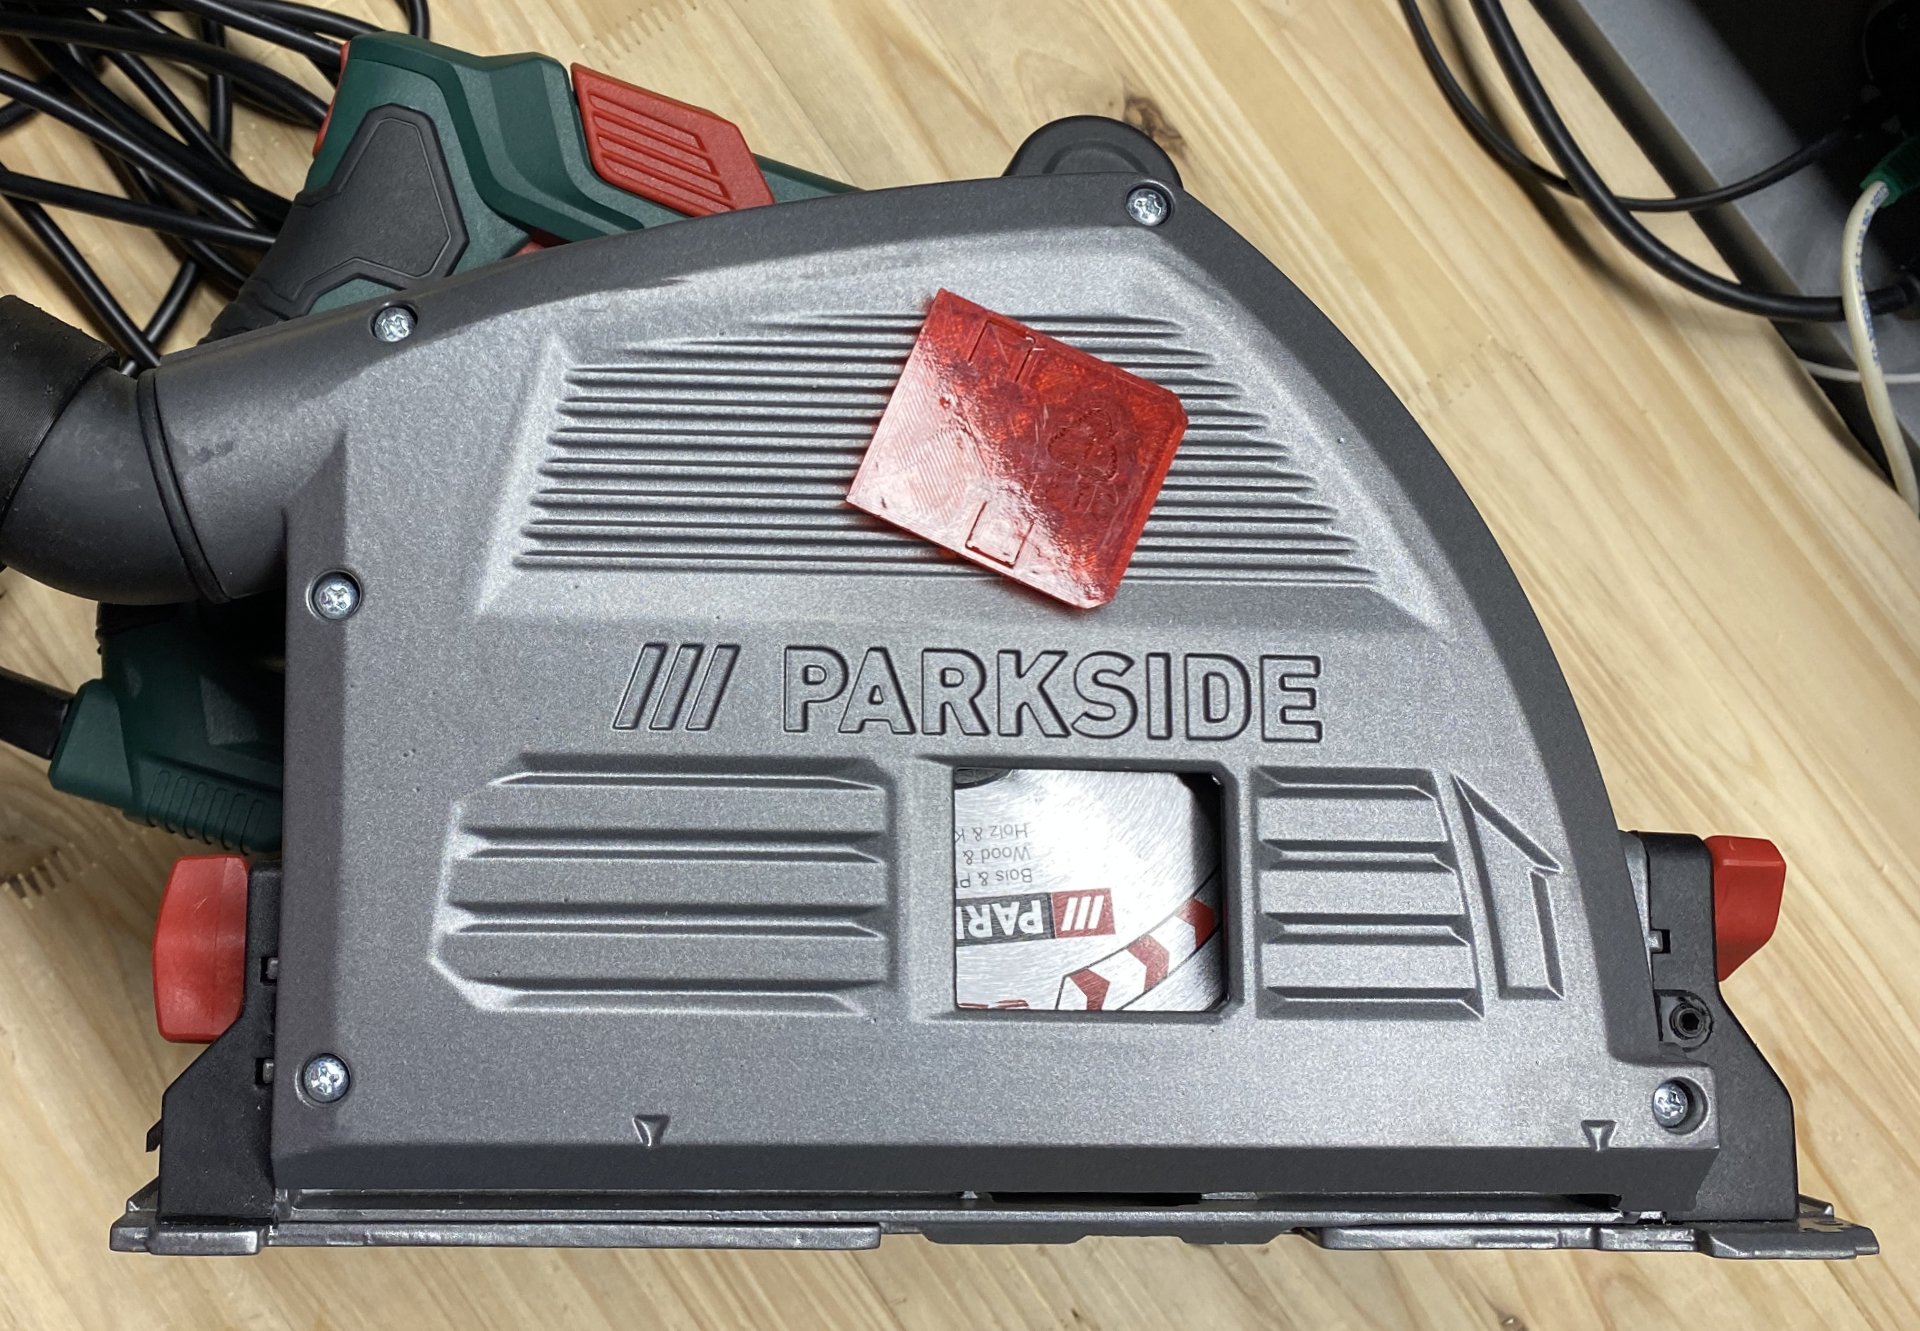 Dust Cover for Parkside Plungesaw PTSS 1200 C1, PTSS 1200 C2 and PTSS 1200 D2